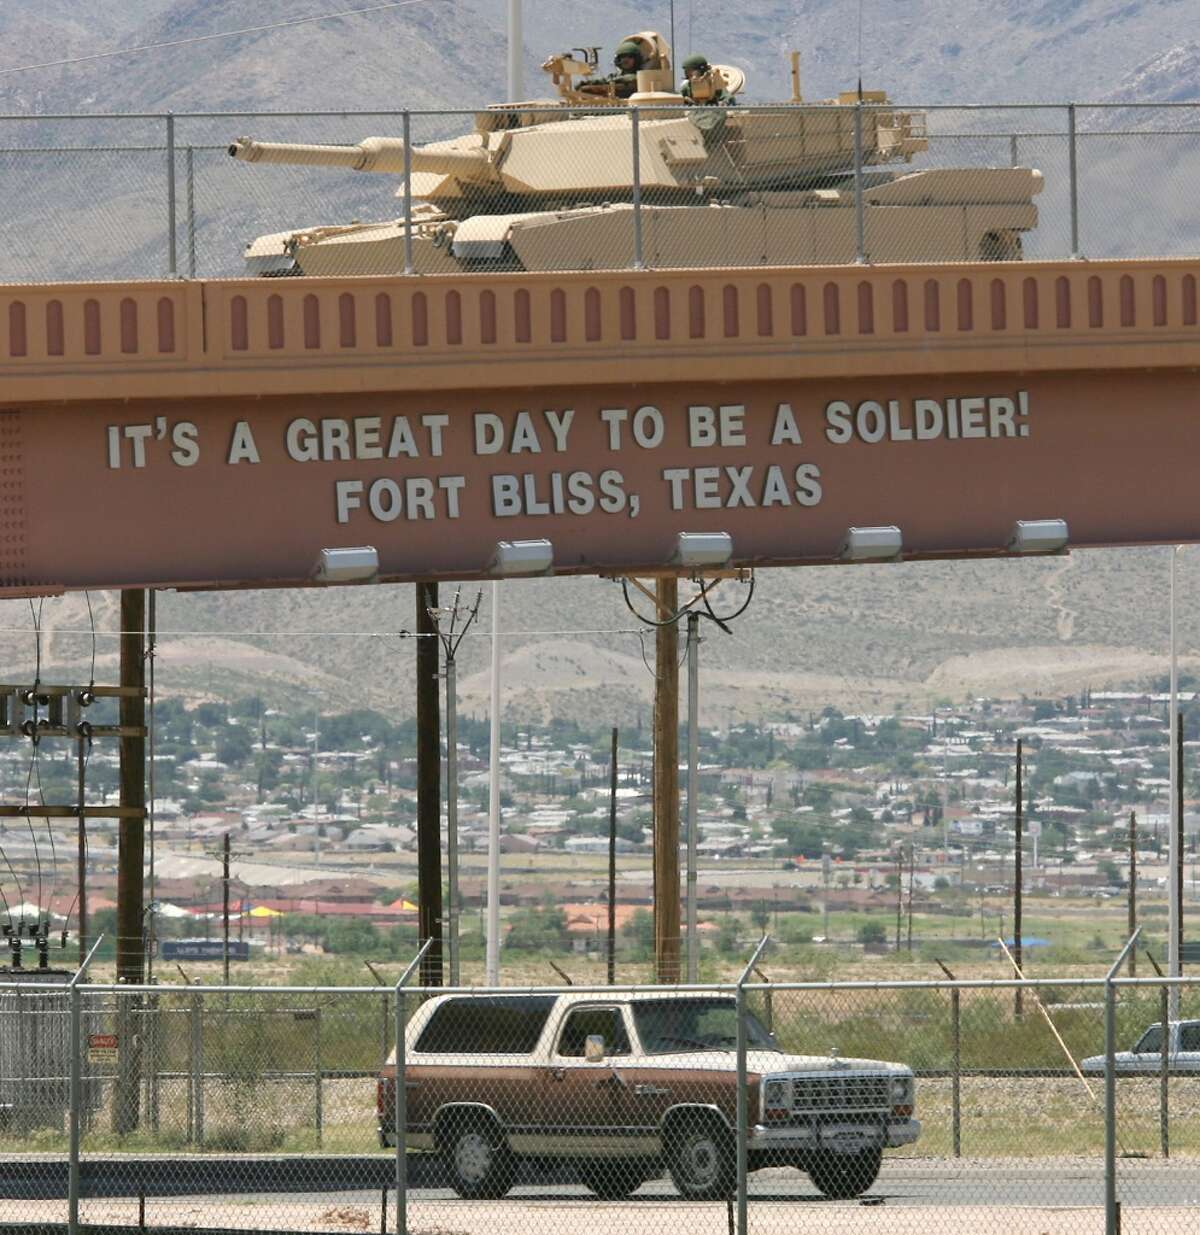 Fort Bliss in El Paso